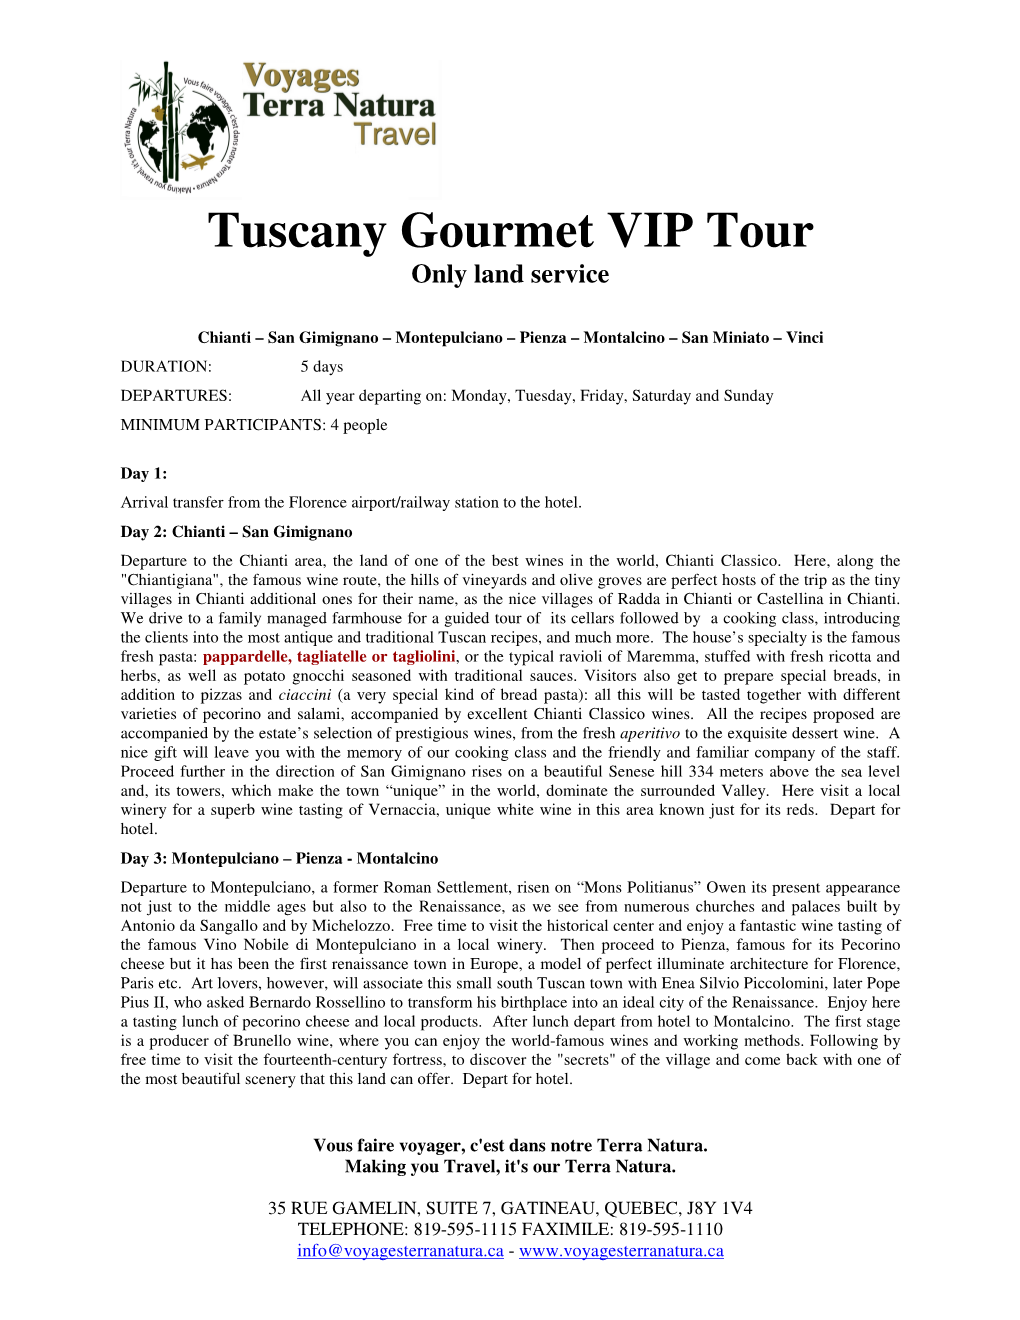 Tuscany Gourmet VIP Tour Only Land Service